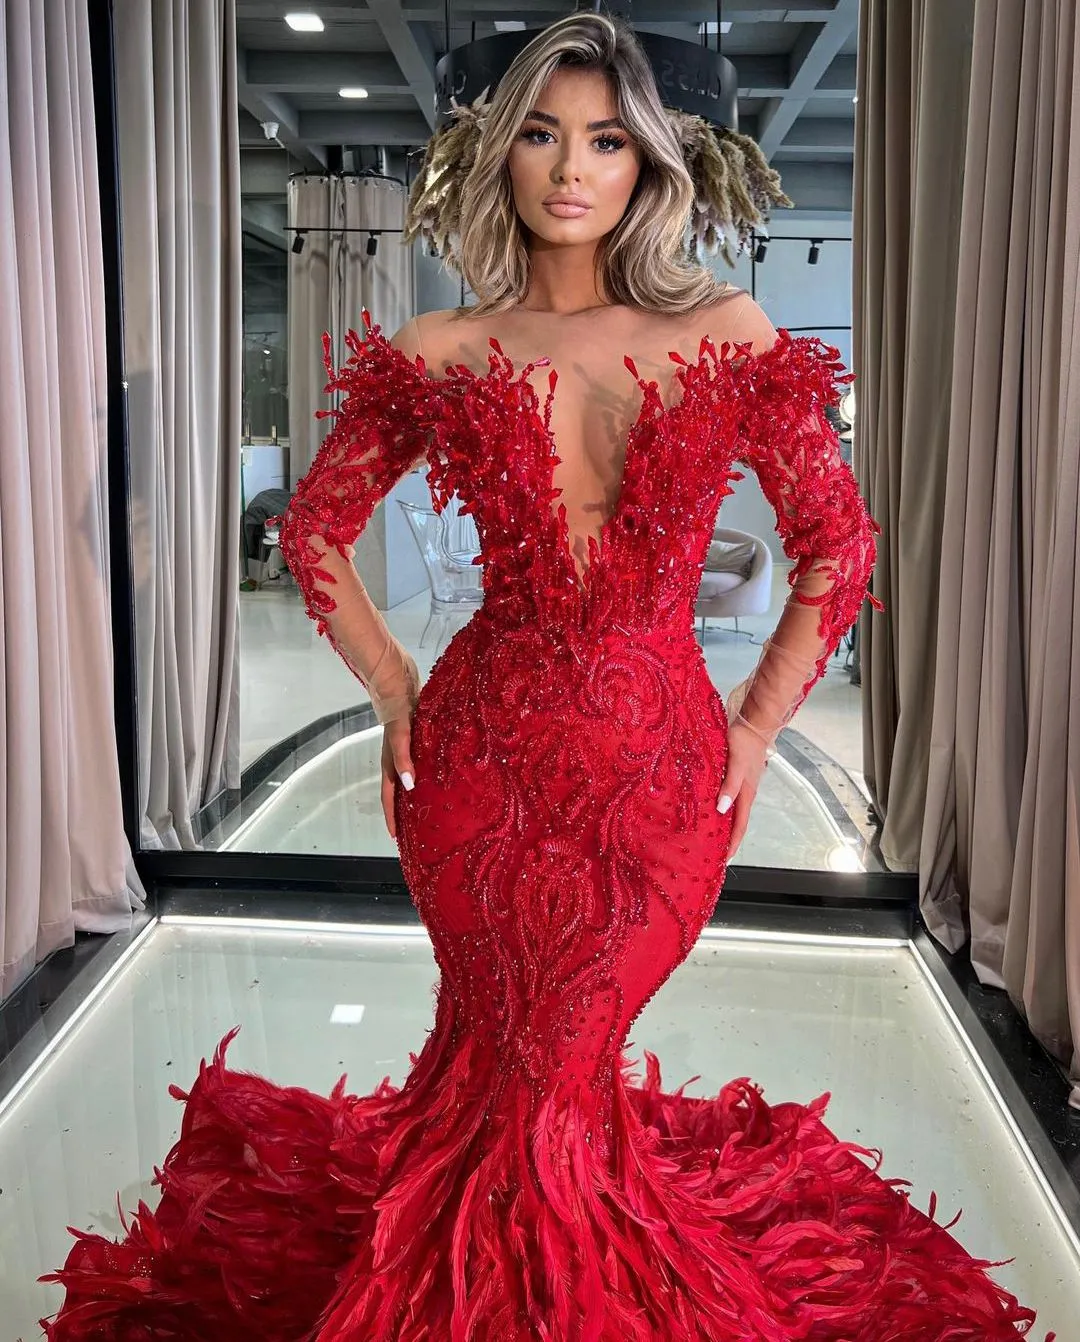 Red Luxury Mermaid Evening Dresses Long Sleeves Deep V Neck Beaded Pearls Appliques Sequins Floor Length Feather Train Prom Dresses Gowns Plus Size Gowns Party Dress